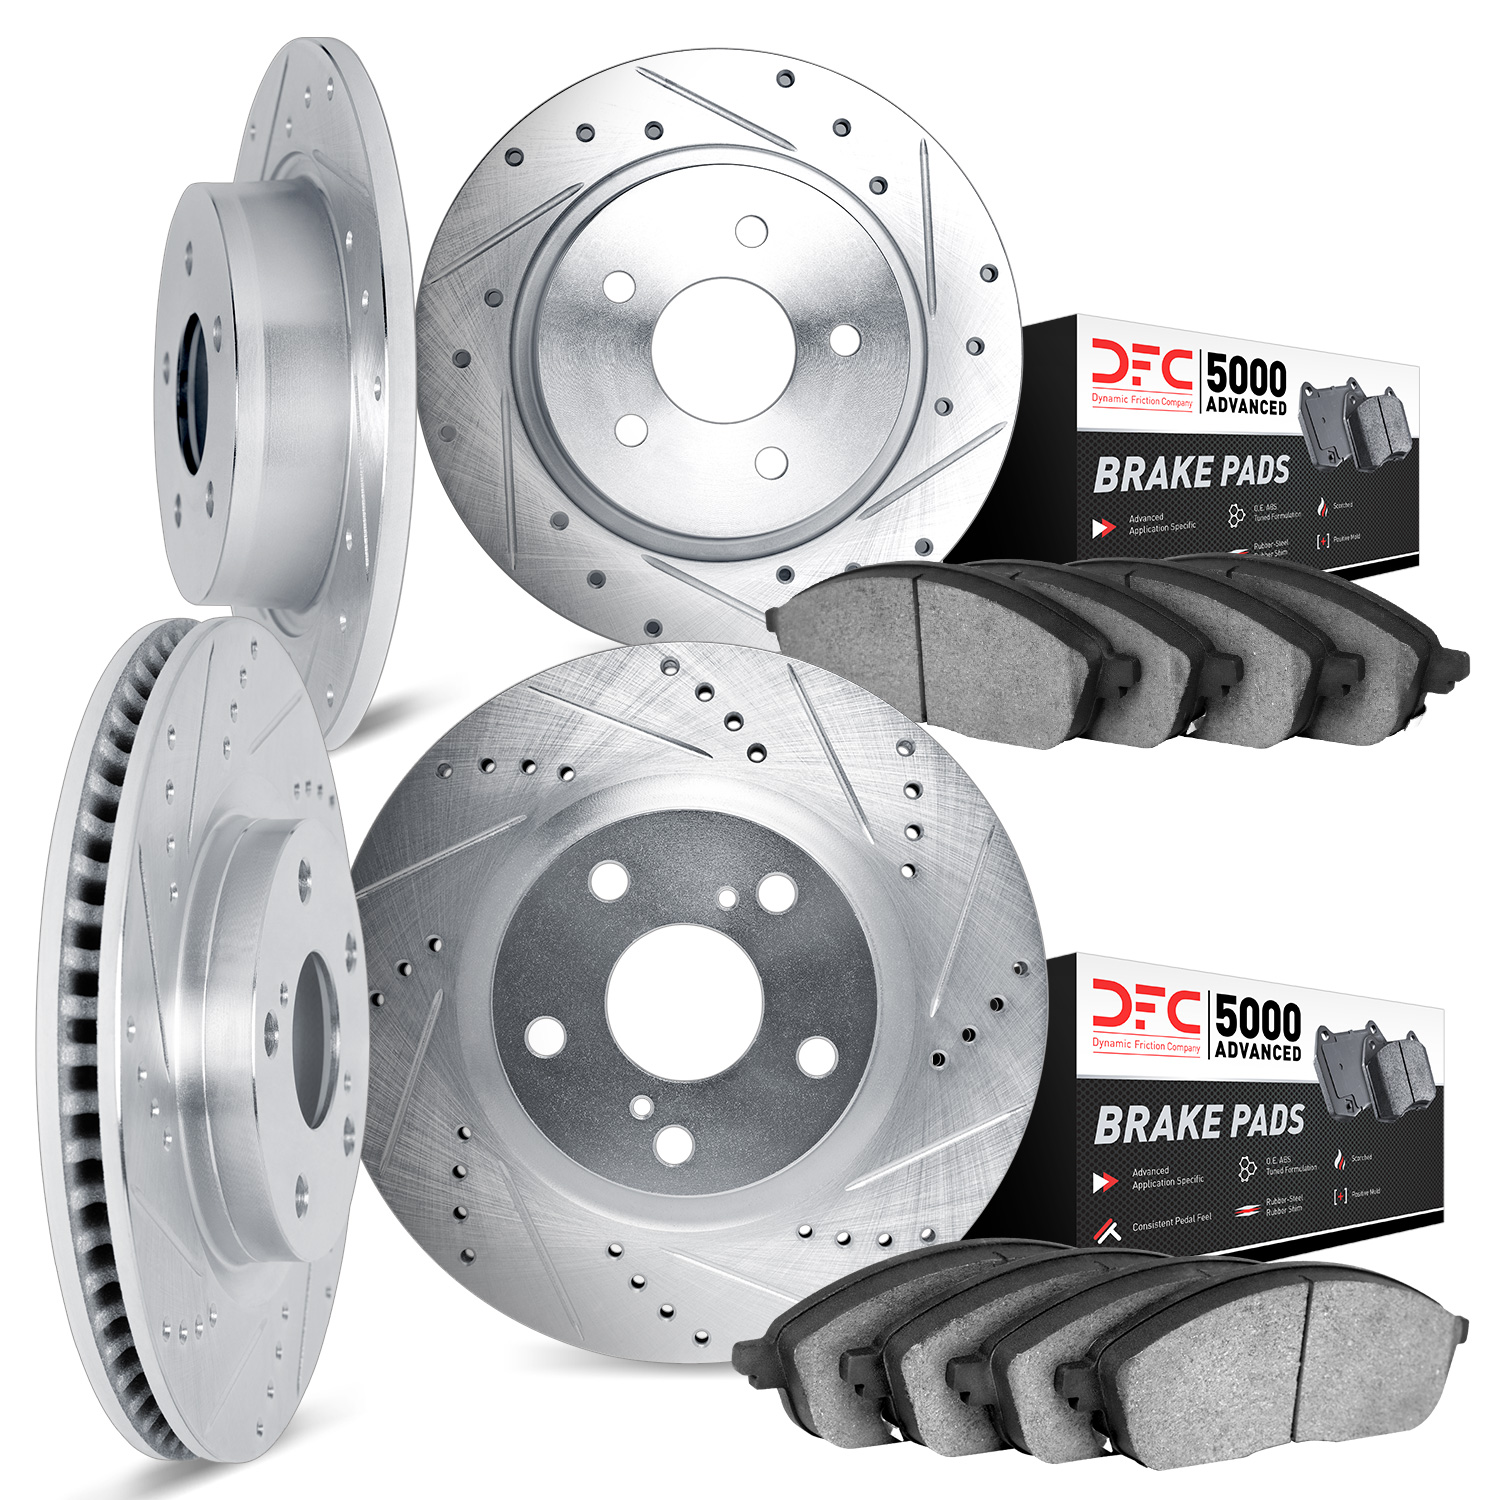 7504-53010 Drilled/Slotted Brake Rotors w/5000 Advanced Brake Pads Kit [Silver], 2004-2012 GM, Position: Front and Rear